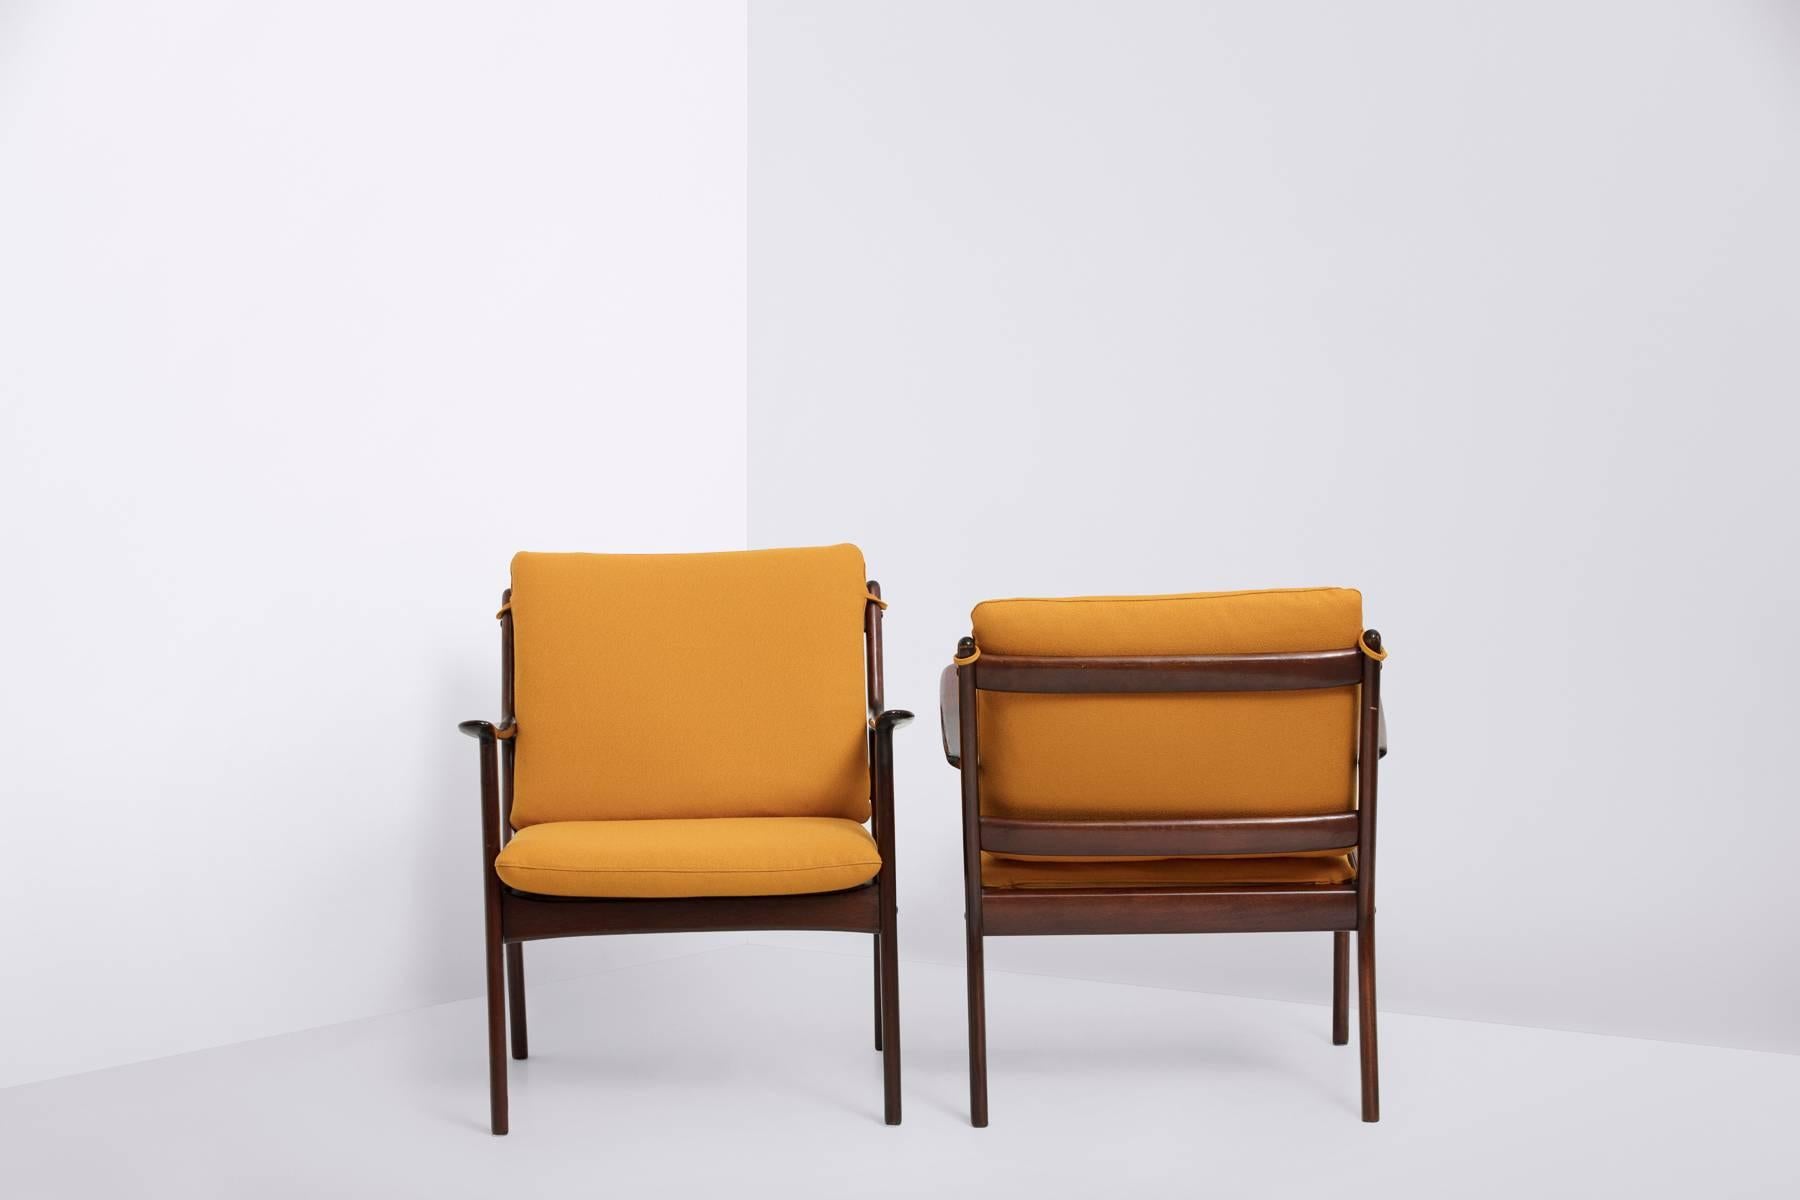 Produced by P. Jeppesen Møbelfabrik
Frame of solid mahogany
Yellow wool upholstery by Kvadrat.